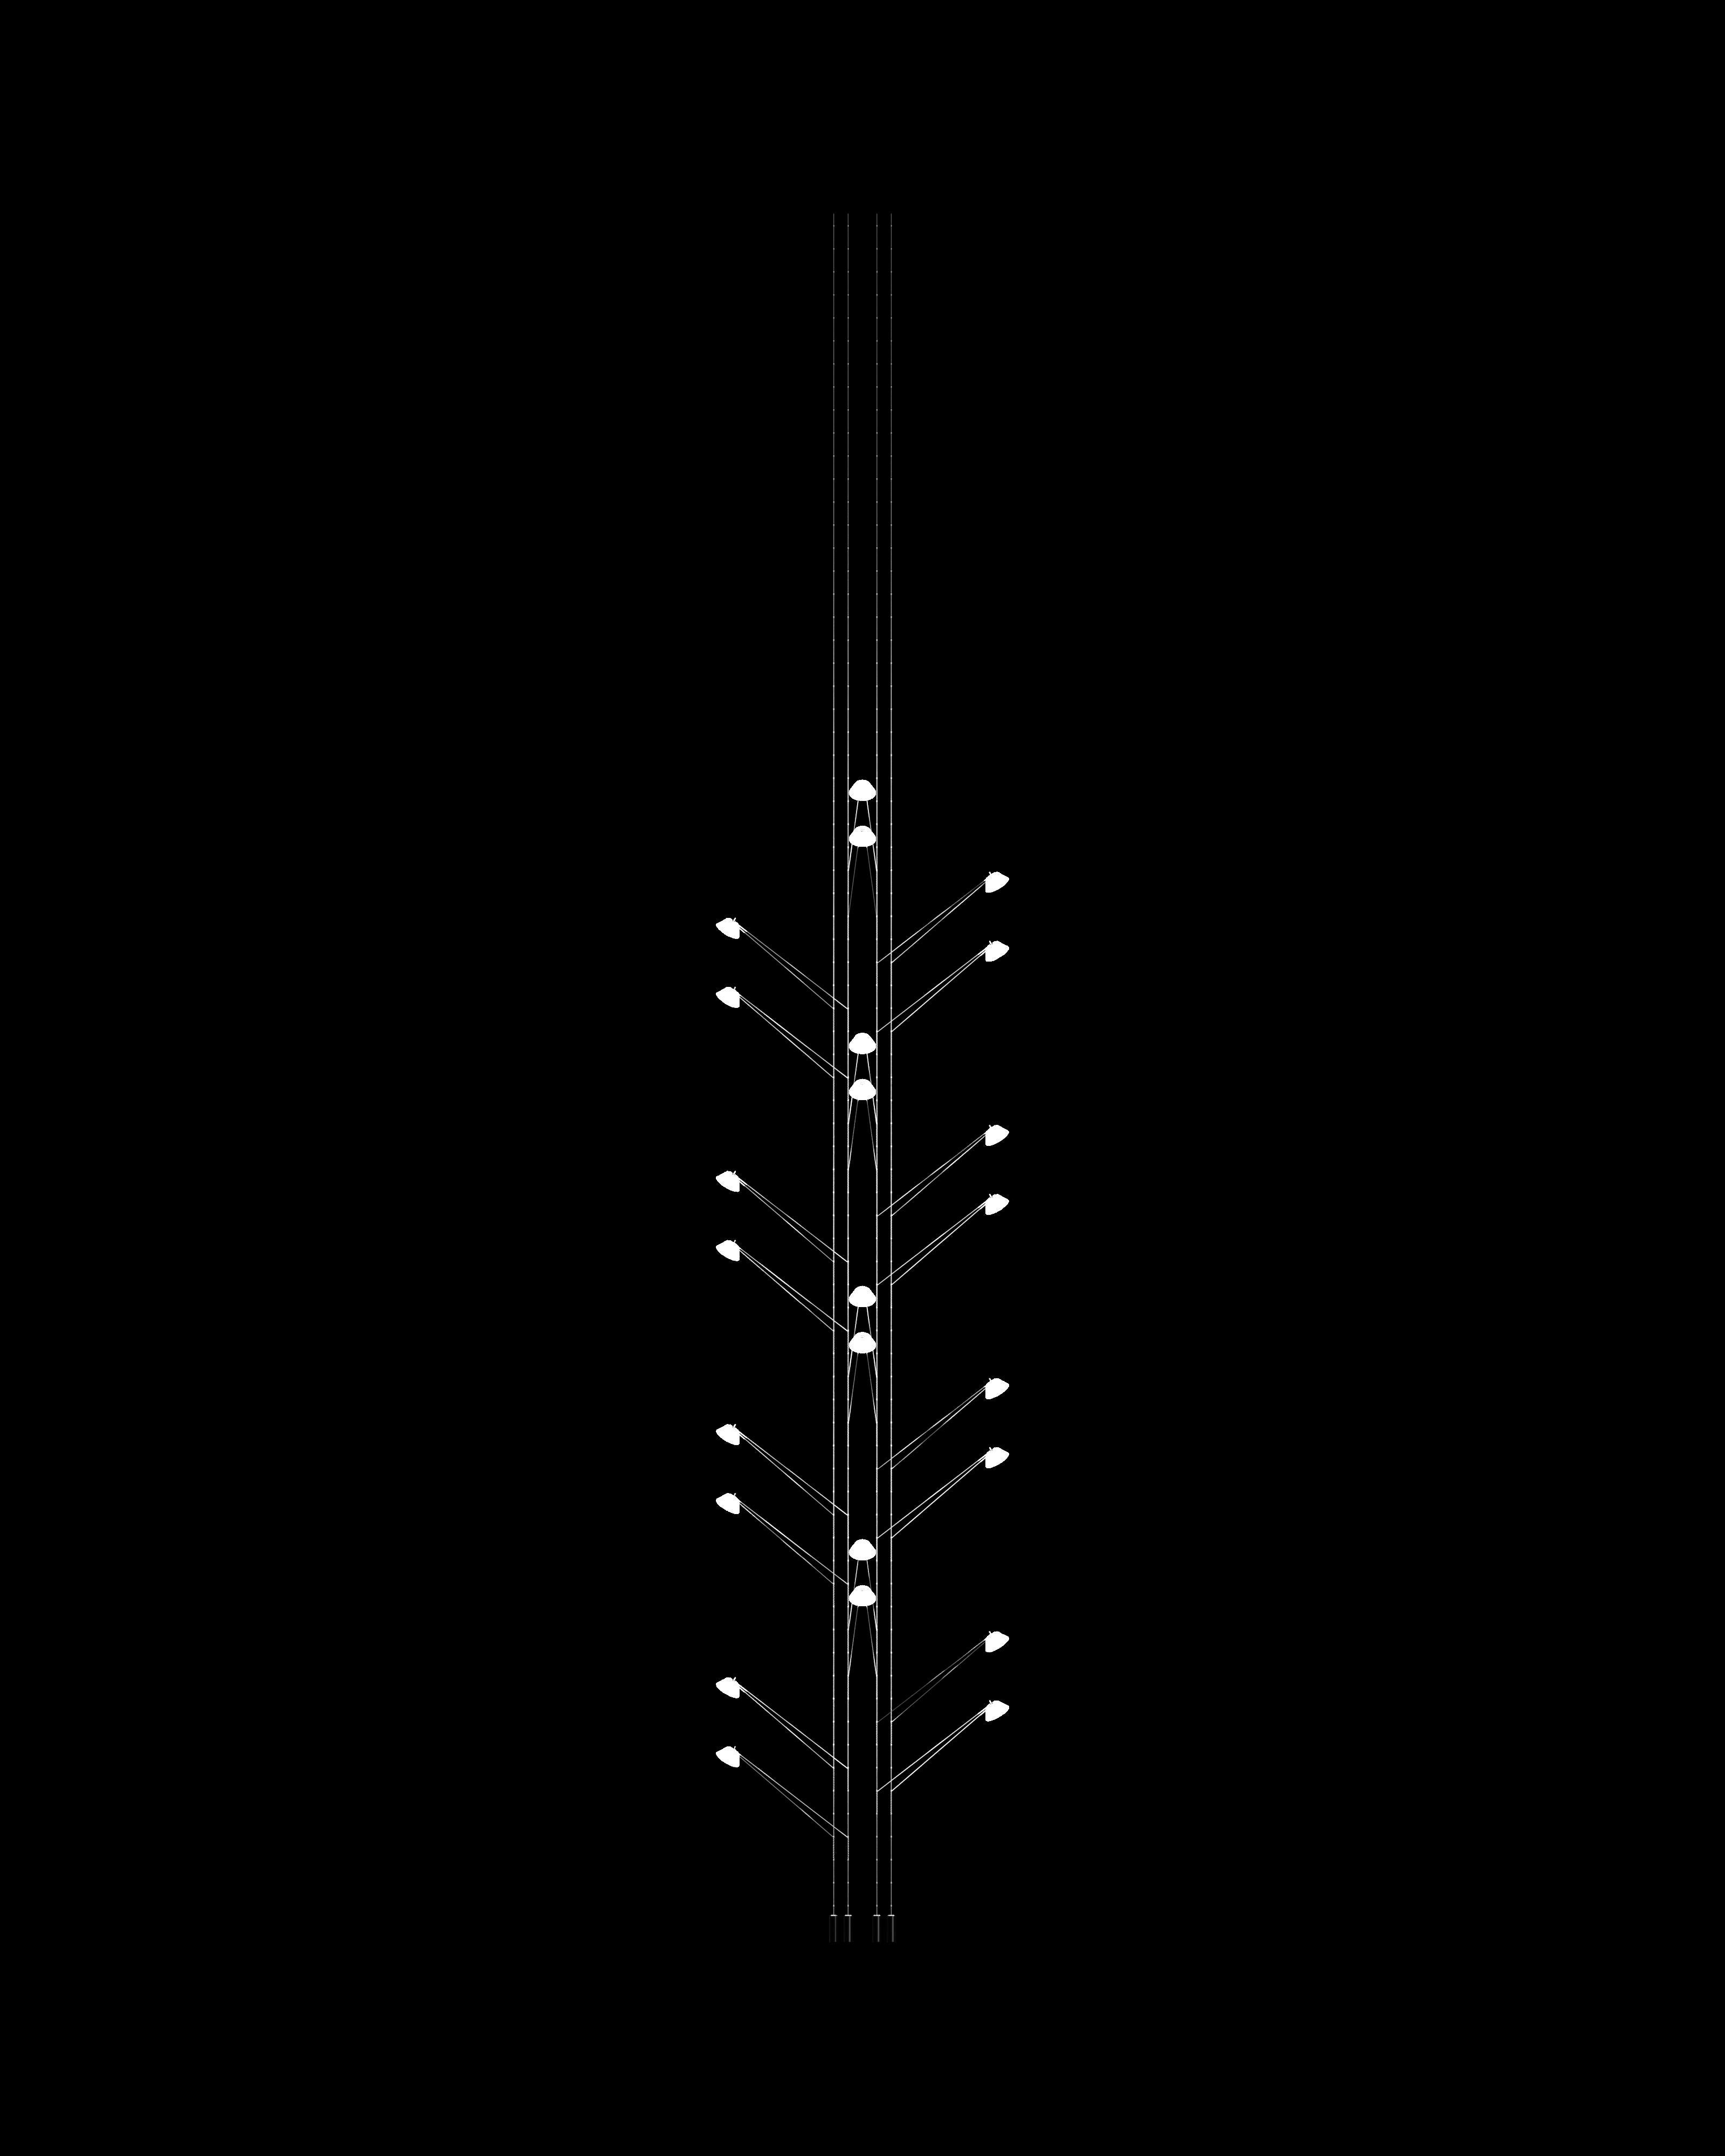 Floating lights 
Model C.06.03.E24 (Form.Rows.Version.Number of Elements)
Form: C (Circle)
Rows: 6 (6 lines)
Version: 3
Number of Elements: 24 lighting elements
 
The design functions as an interior tool made for any possible space. It can be